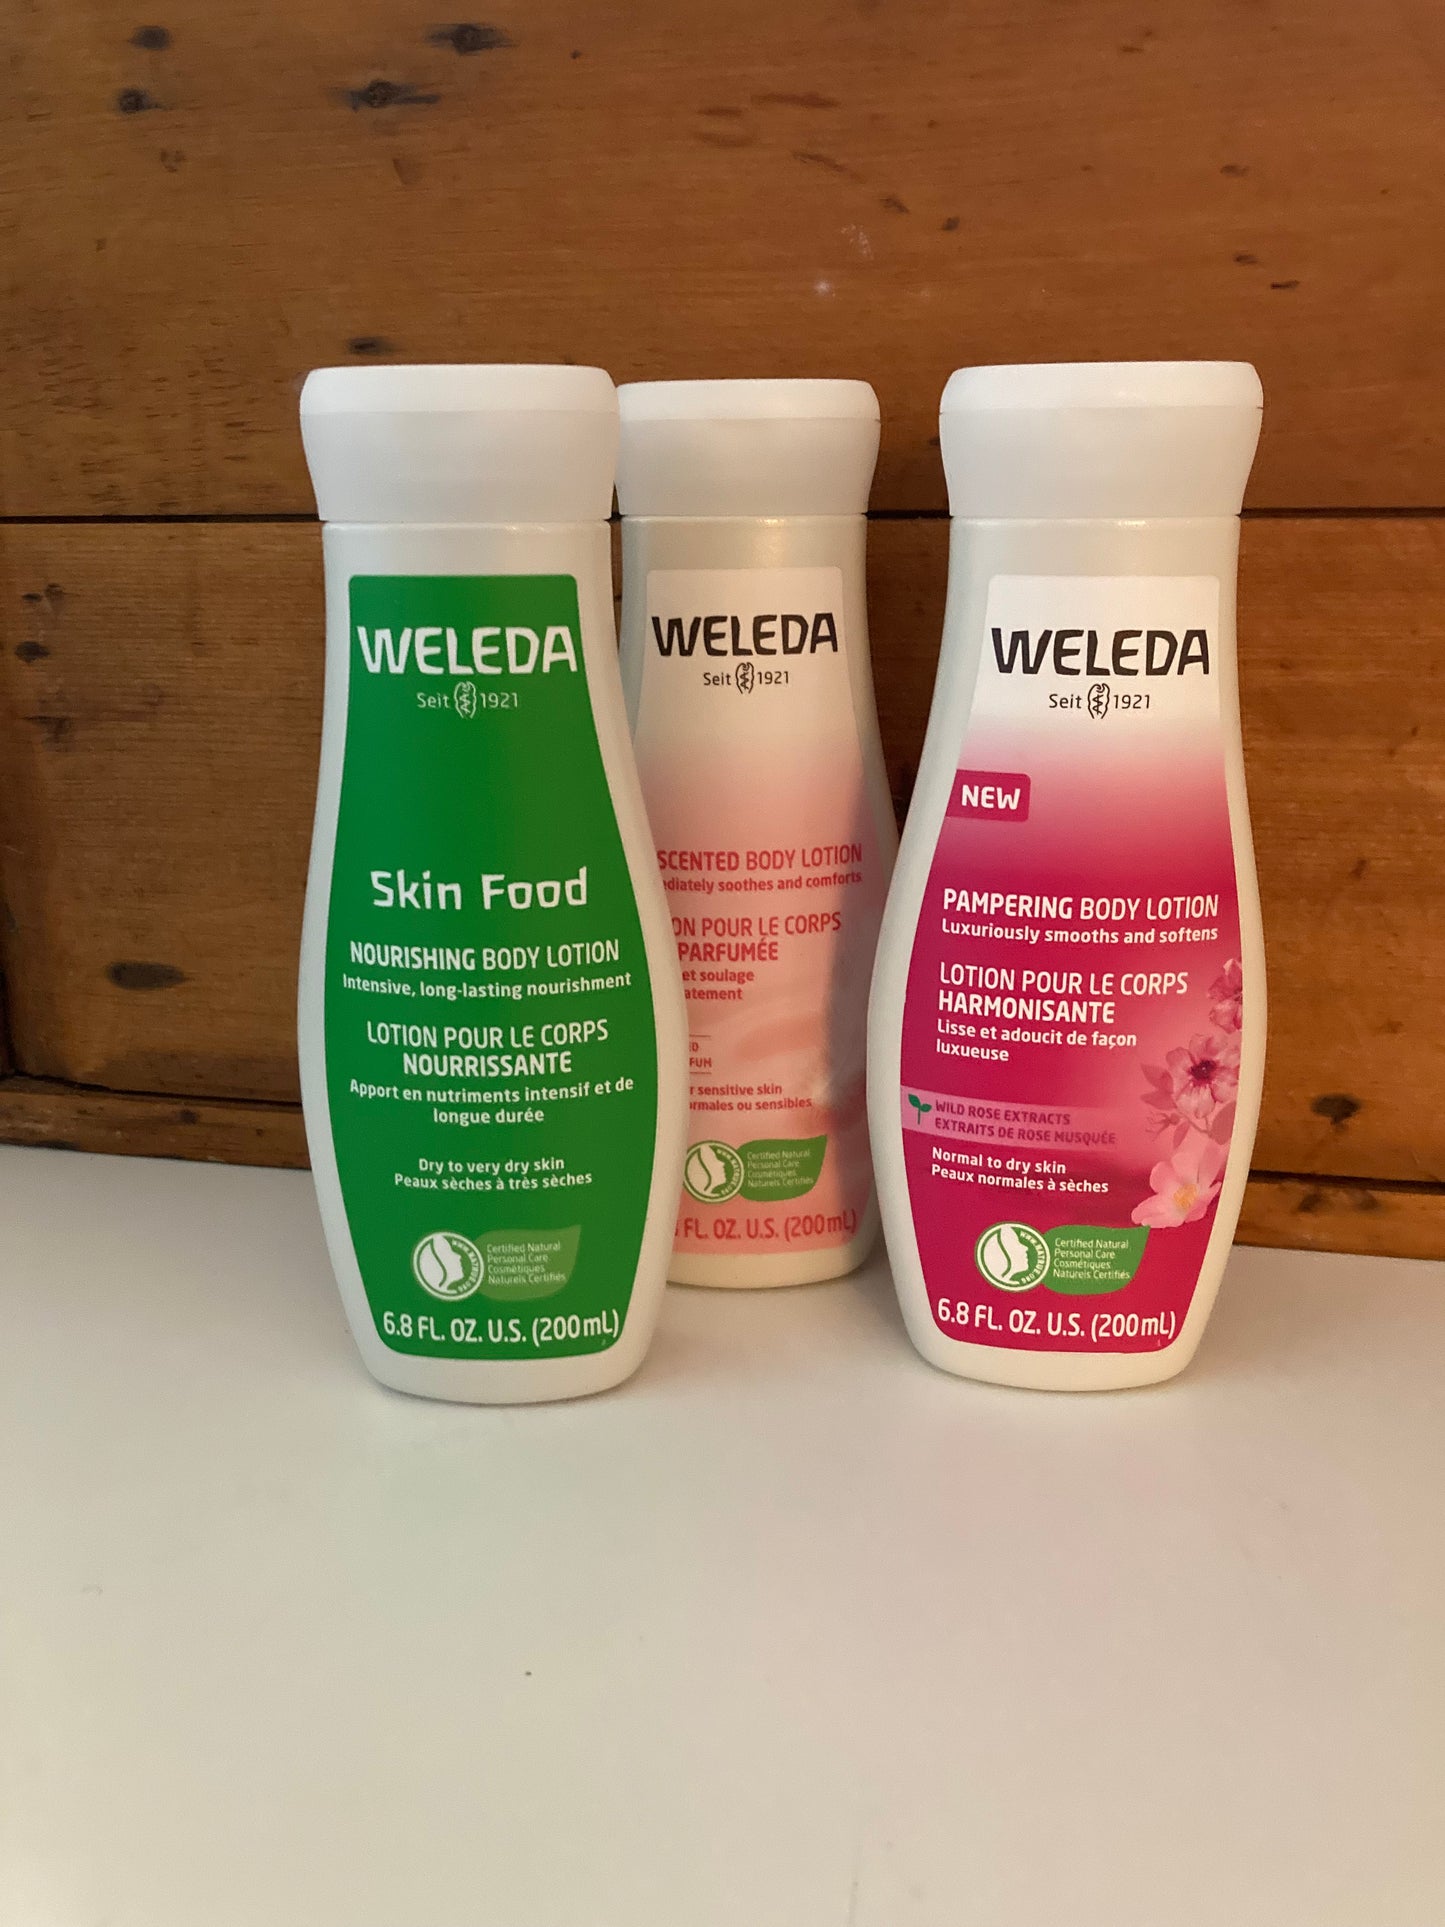 Weleda PAMPERING ROSE BODY LOTION… New!